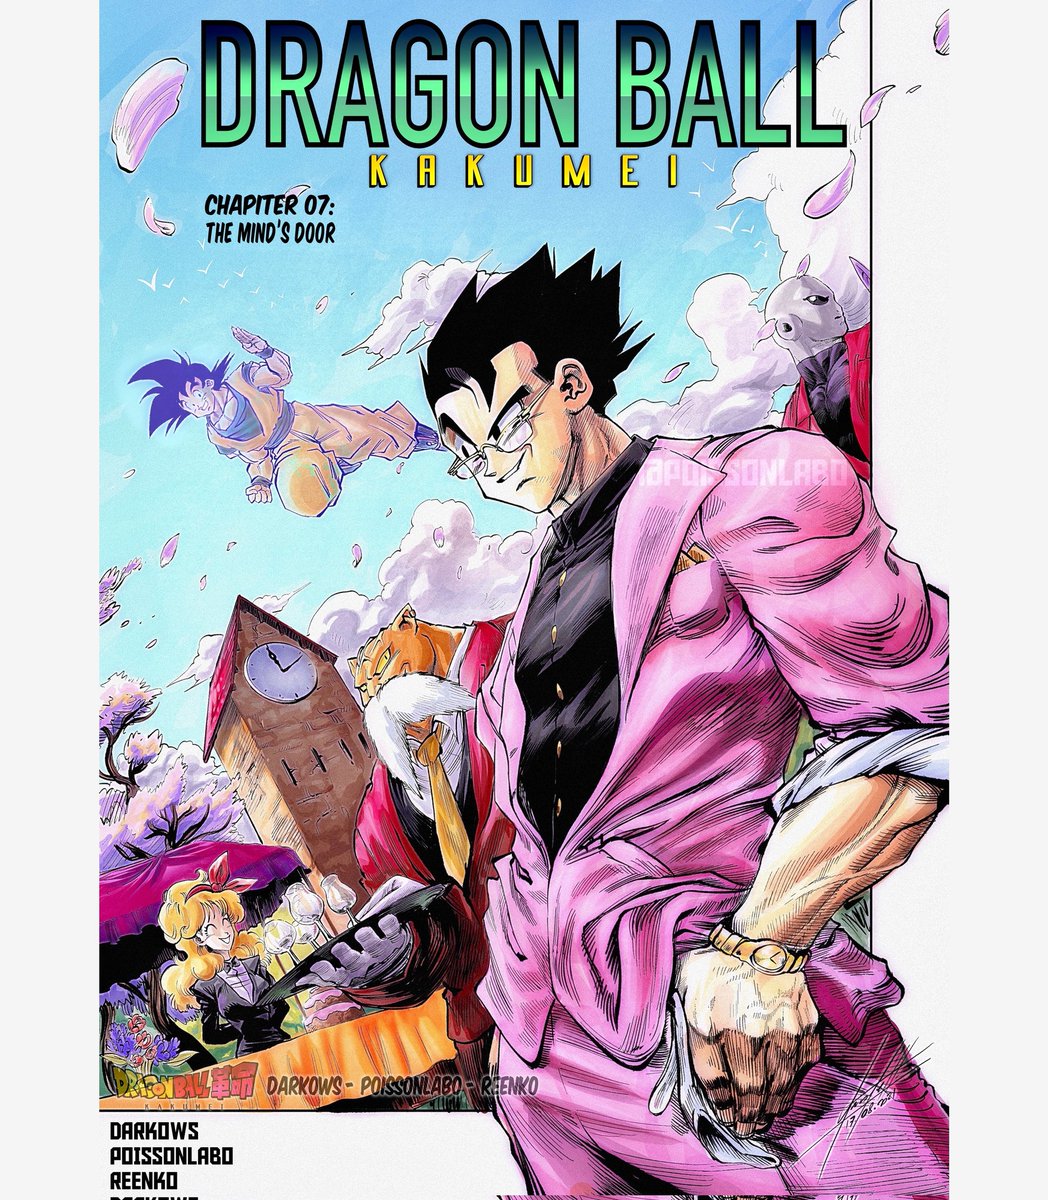 REENKO Ball Kakumei #GokuDay Day until Chapter 7 of #DragonBallKakumei, and here it's cover! Chapter 7 will be out tomorrow, 03.25.2022 at 6.30 p.m (18h, french hour)